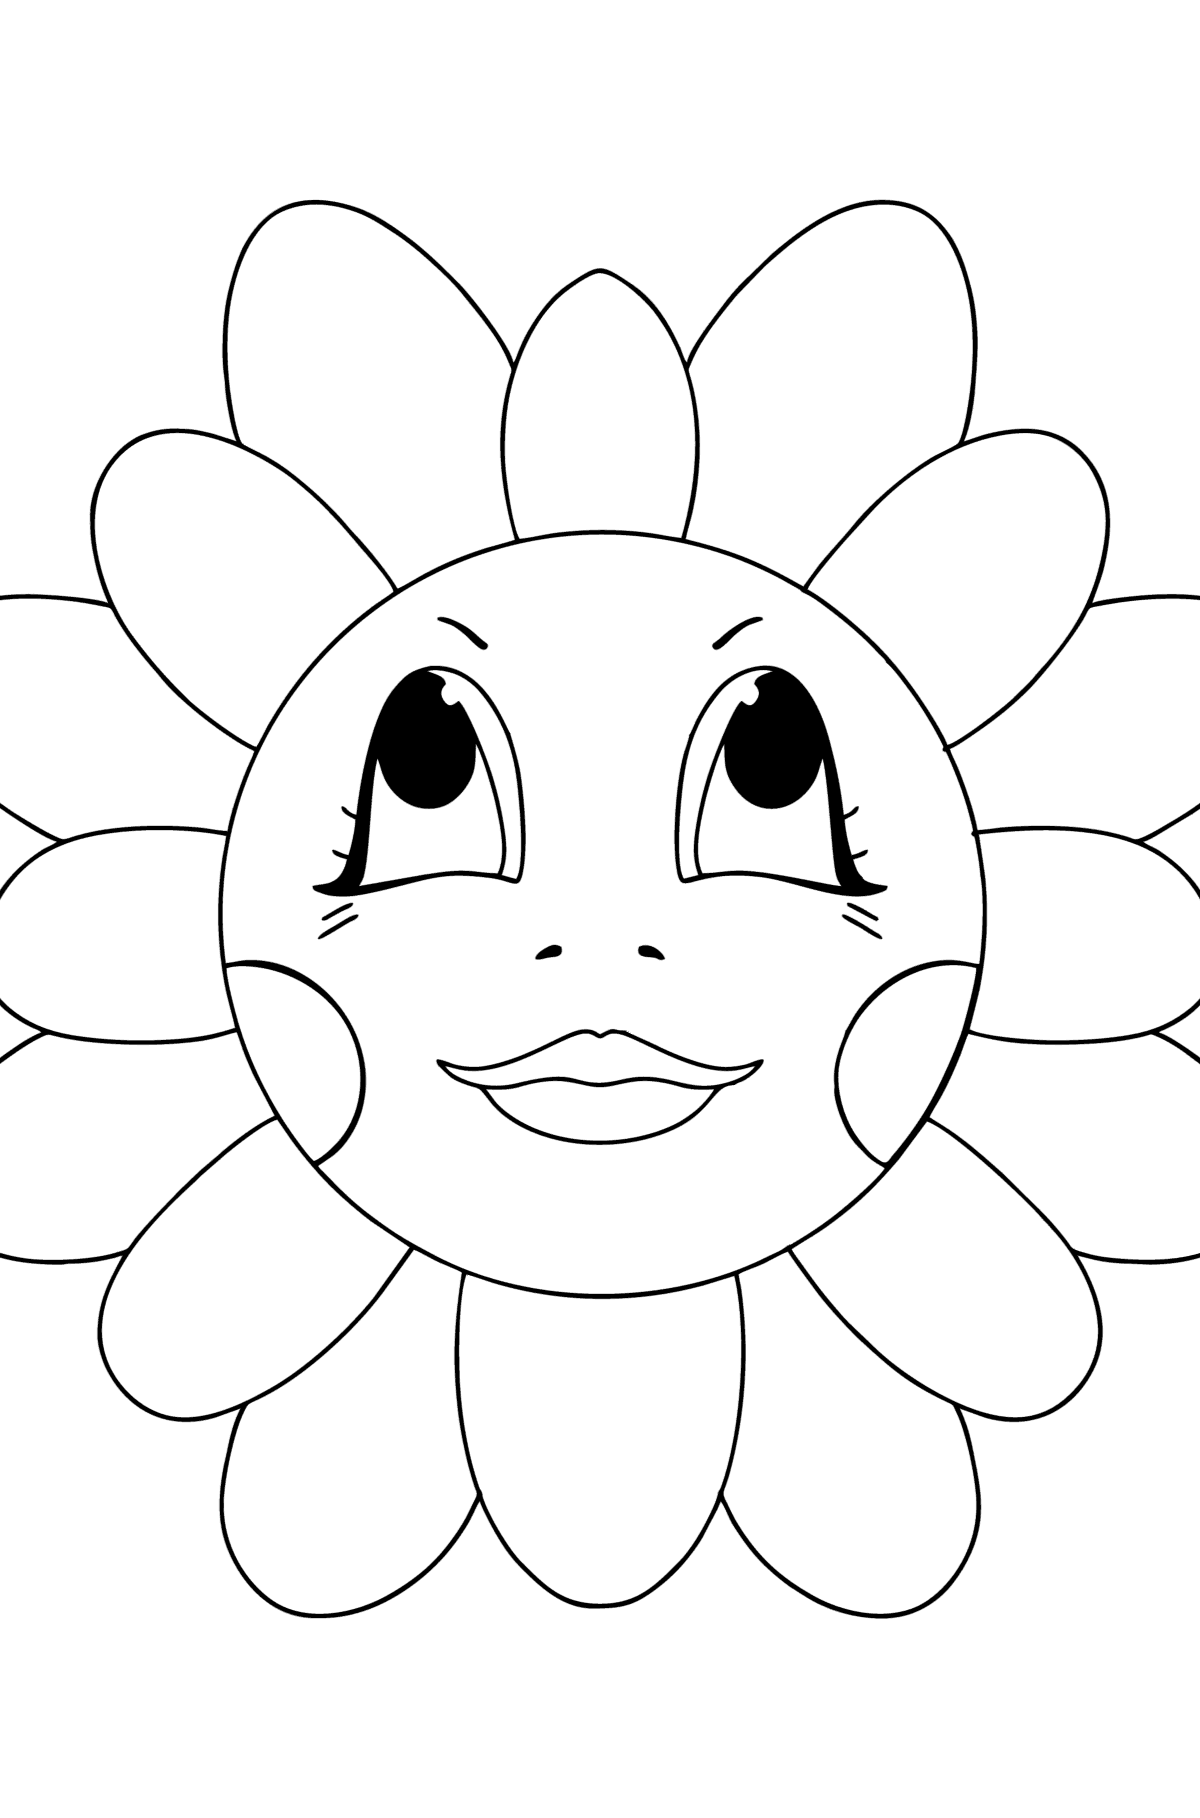 Chamomile with eyes coloring page - Coloring Pages for Kids